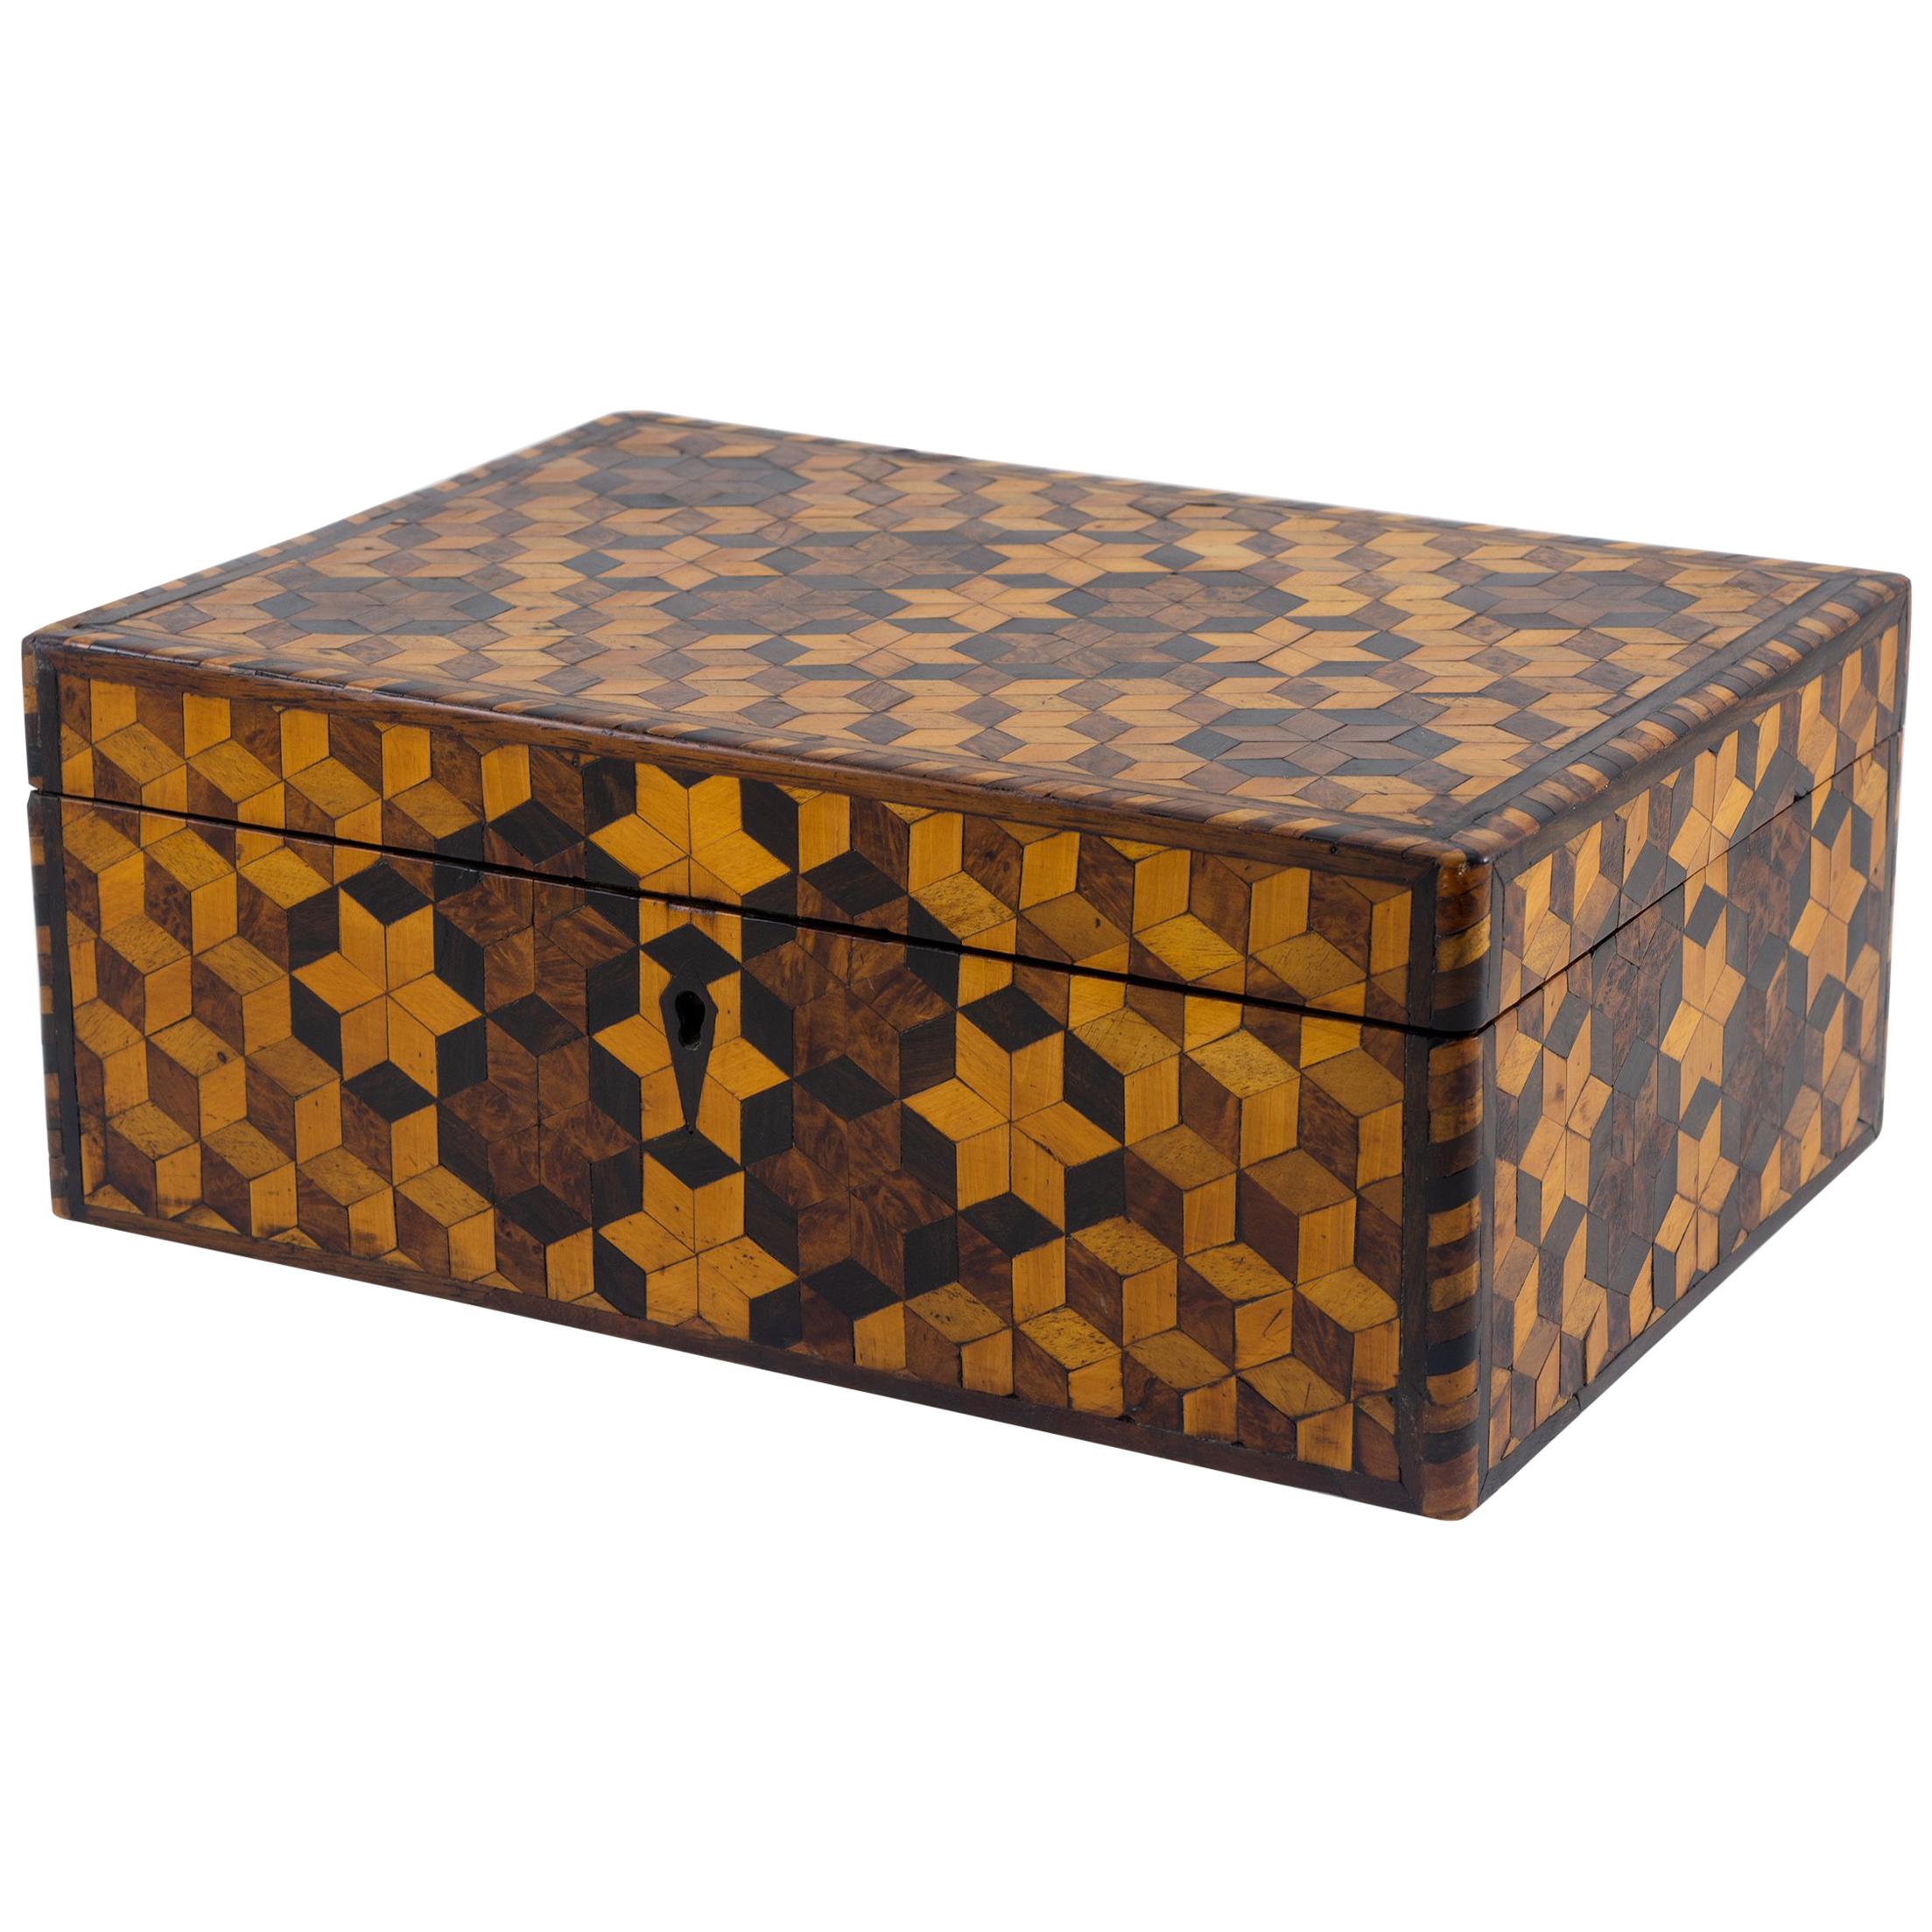 Marquetry Sewing Box